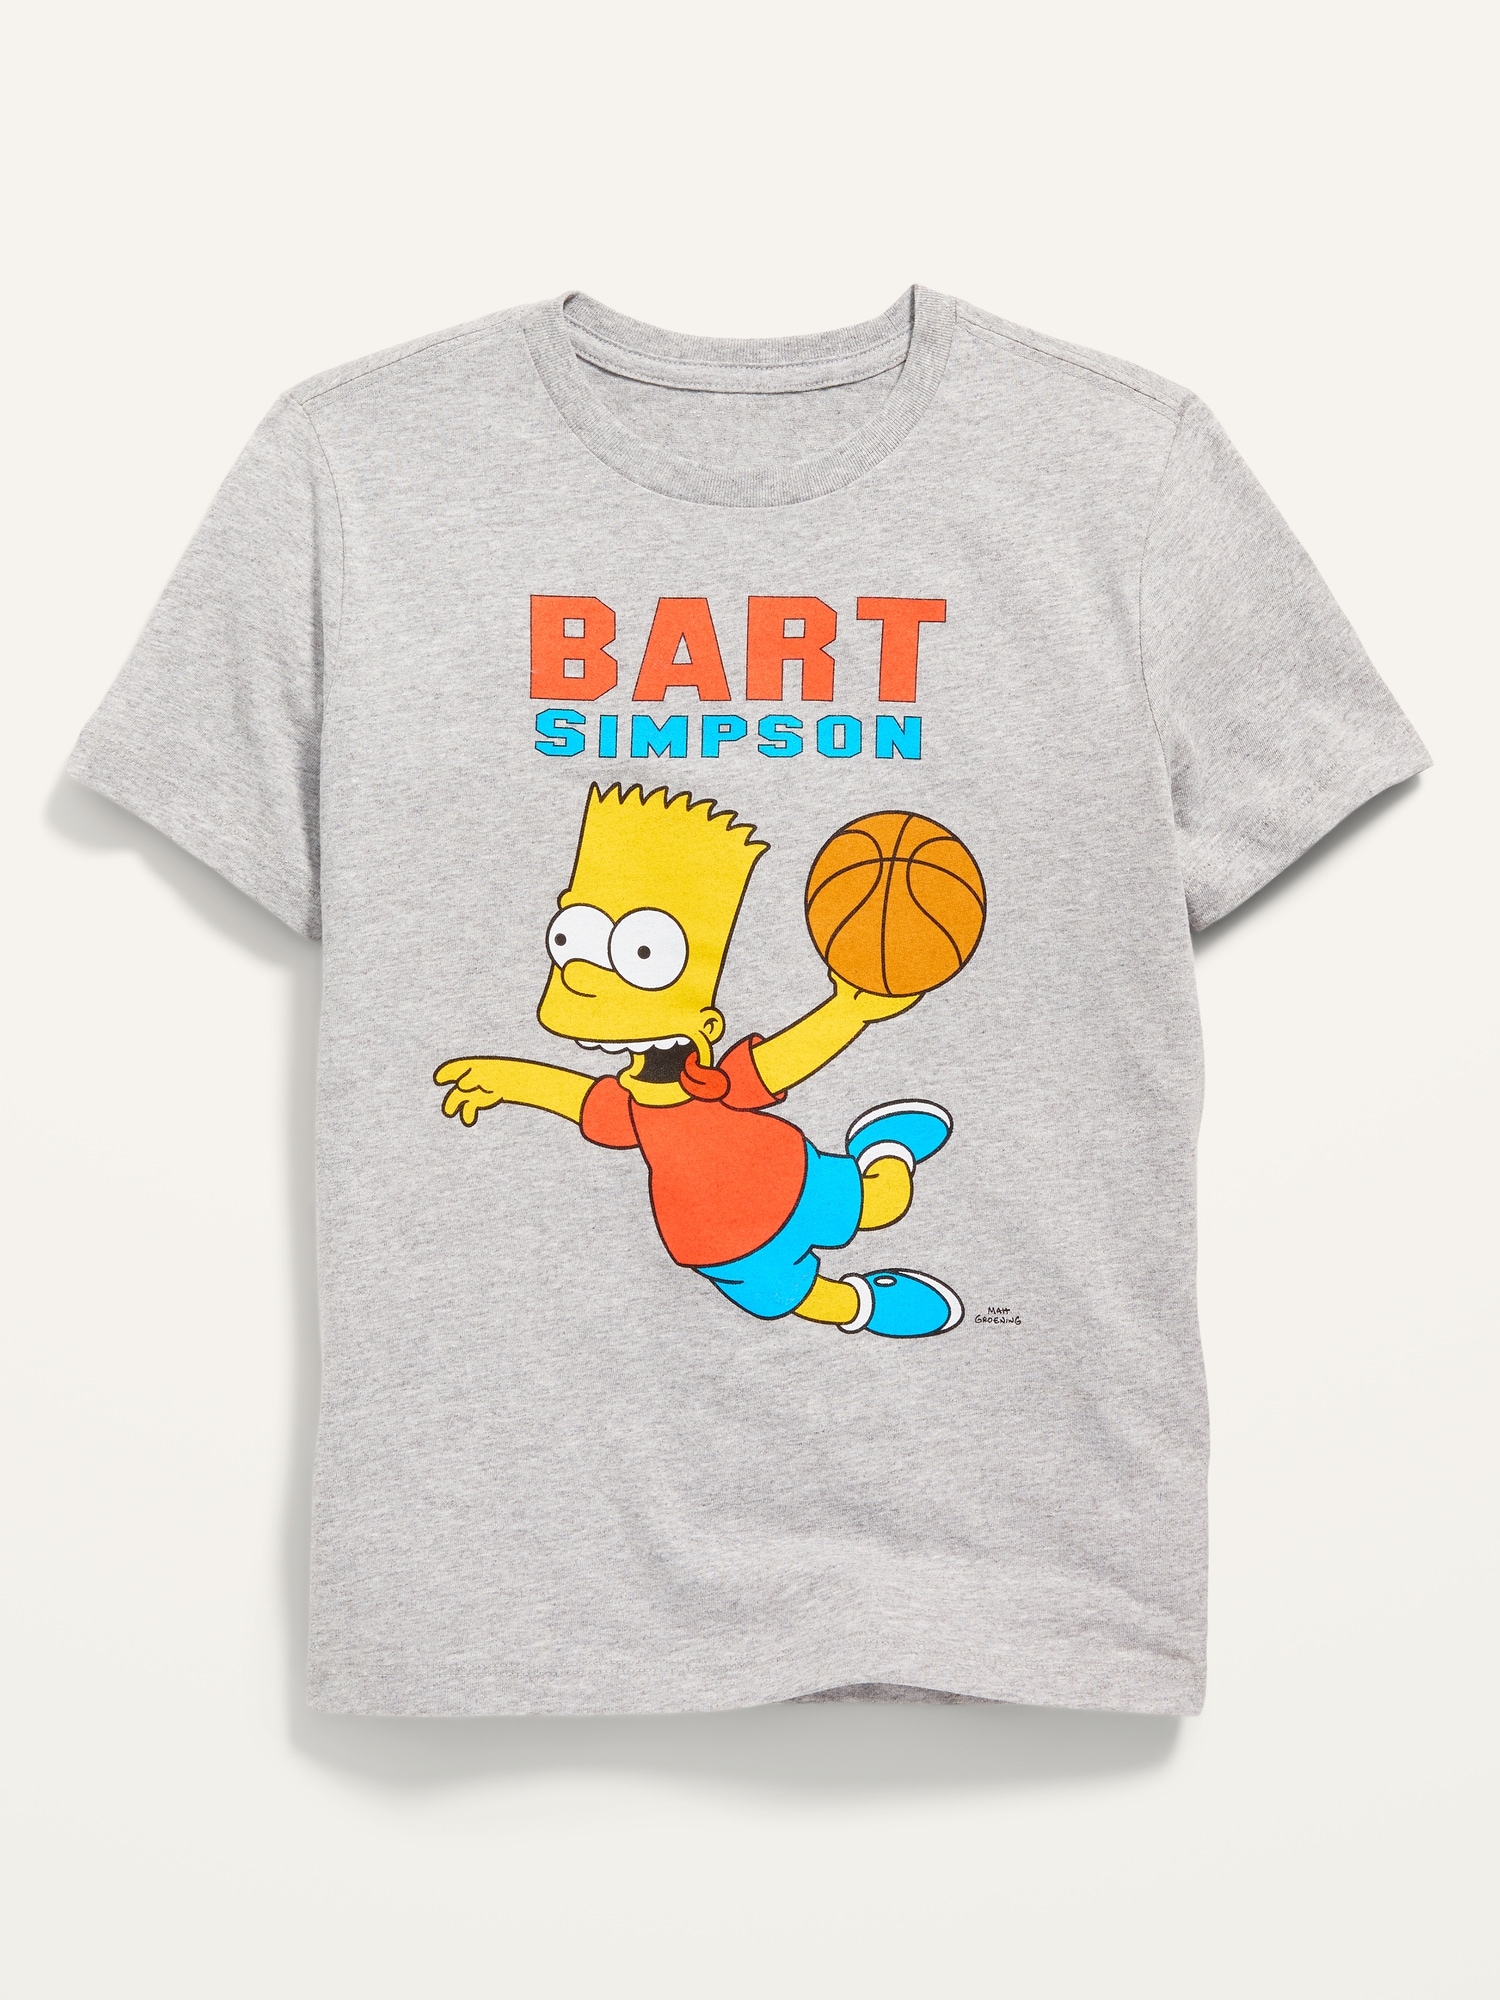 Simpsons™ "Bart Simpson" Gender-Neutral T-Shirt for Kids | Old Navy